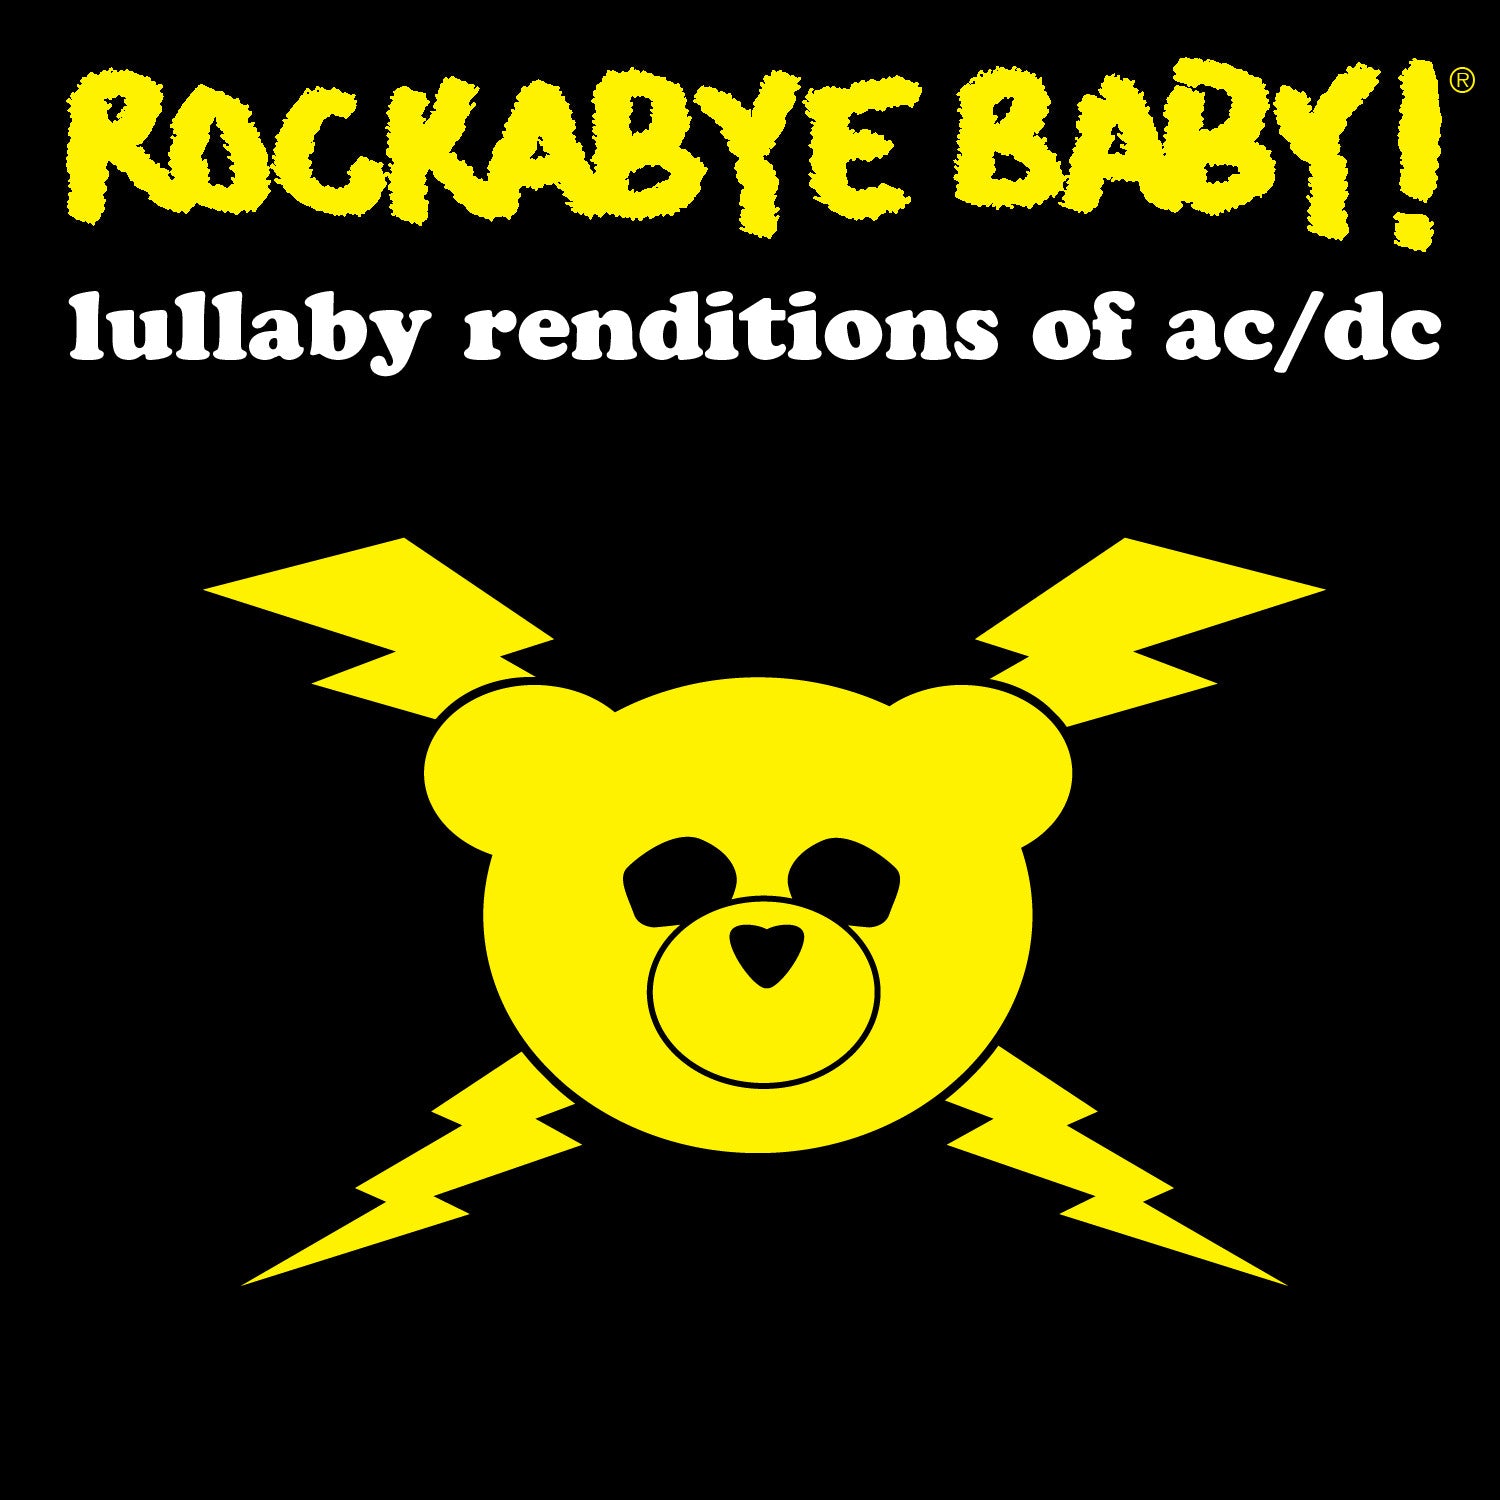 rockabye baby modern lullaby renditions acdc